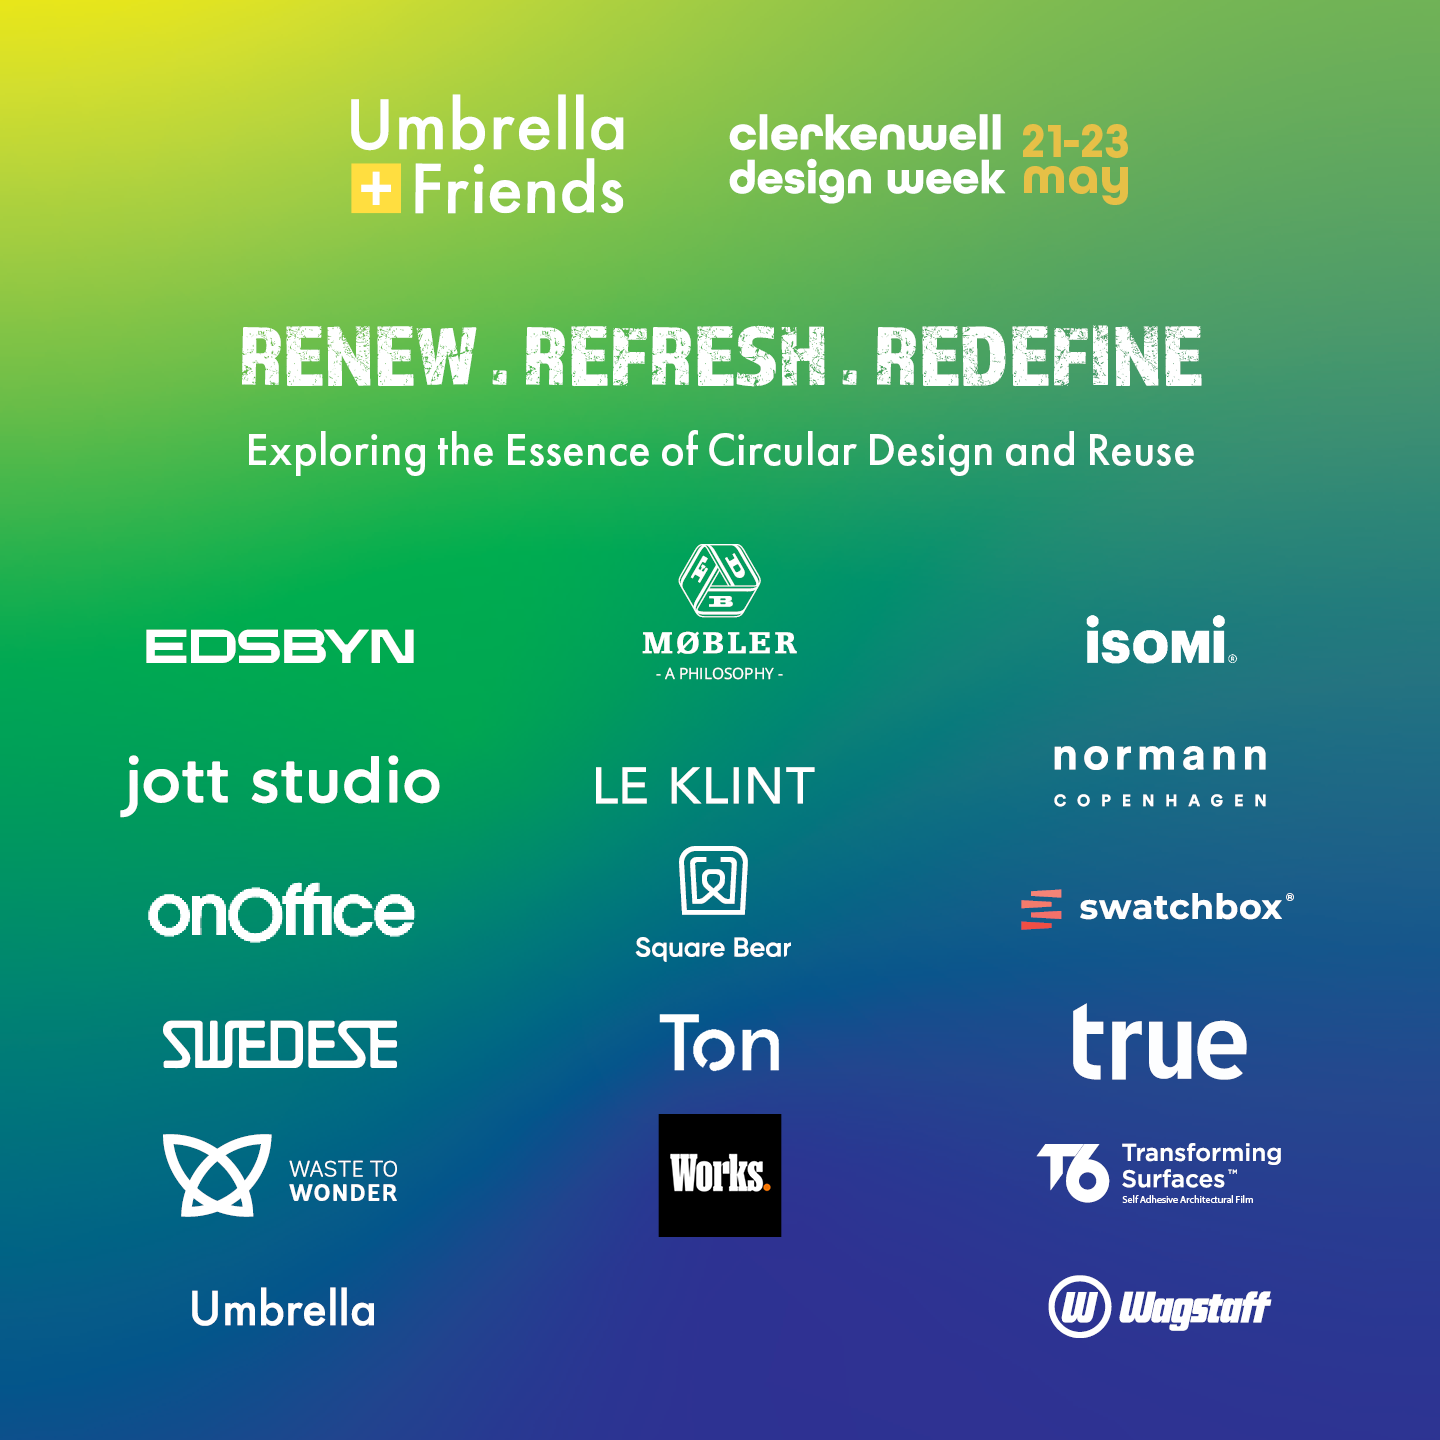 UMBRELLA FURNITURE AND WAGSTAFF ANNOUNCE THE BUSIEST SHOWROOM YET AT CLERKENWELL DESIGN WEEK 2024 WITH THEIR CELEBRATION OF CIRCULAR DESIGN.